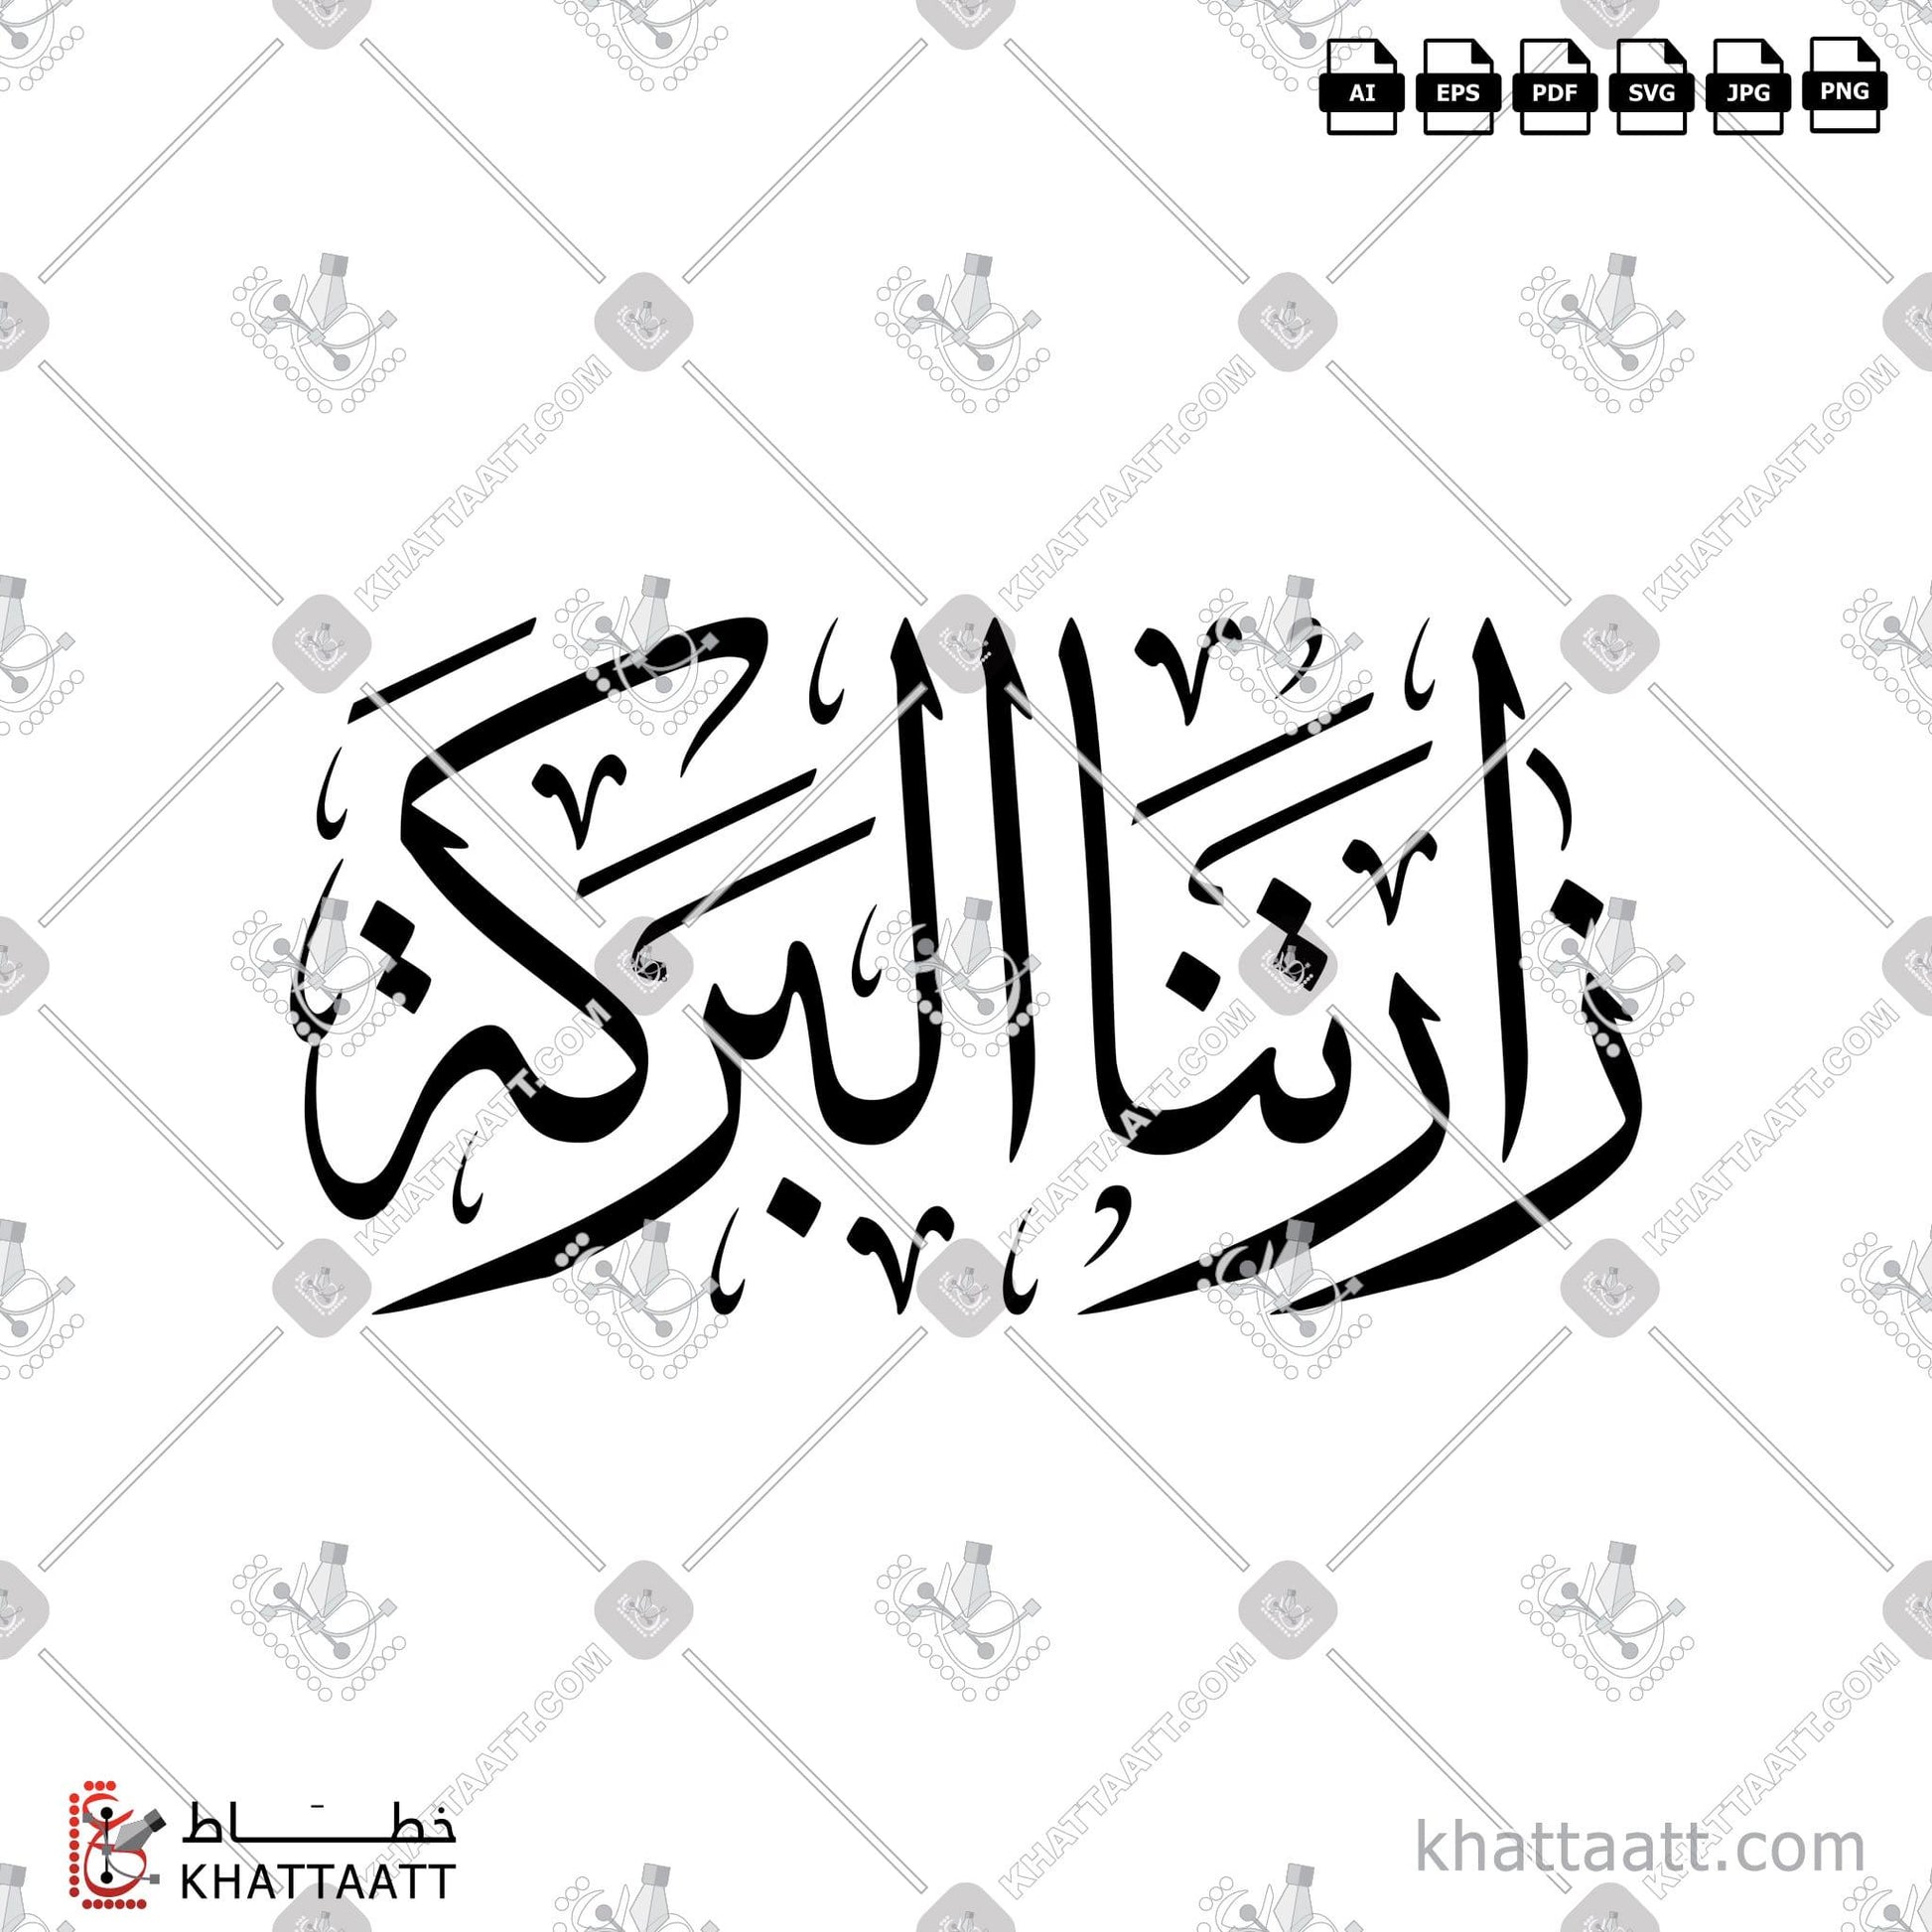 Download Arabic Calligraphy of زارتنا البركة in Thuluth - خط الثلث in vector and .png